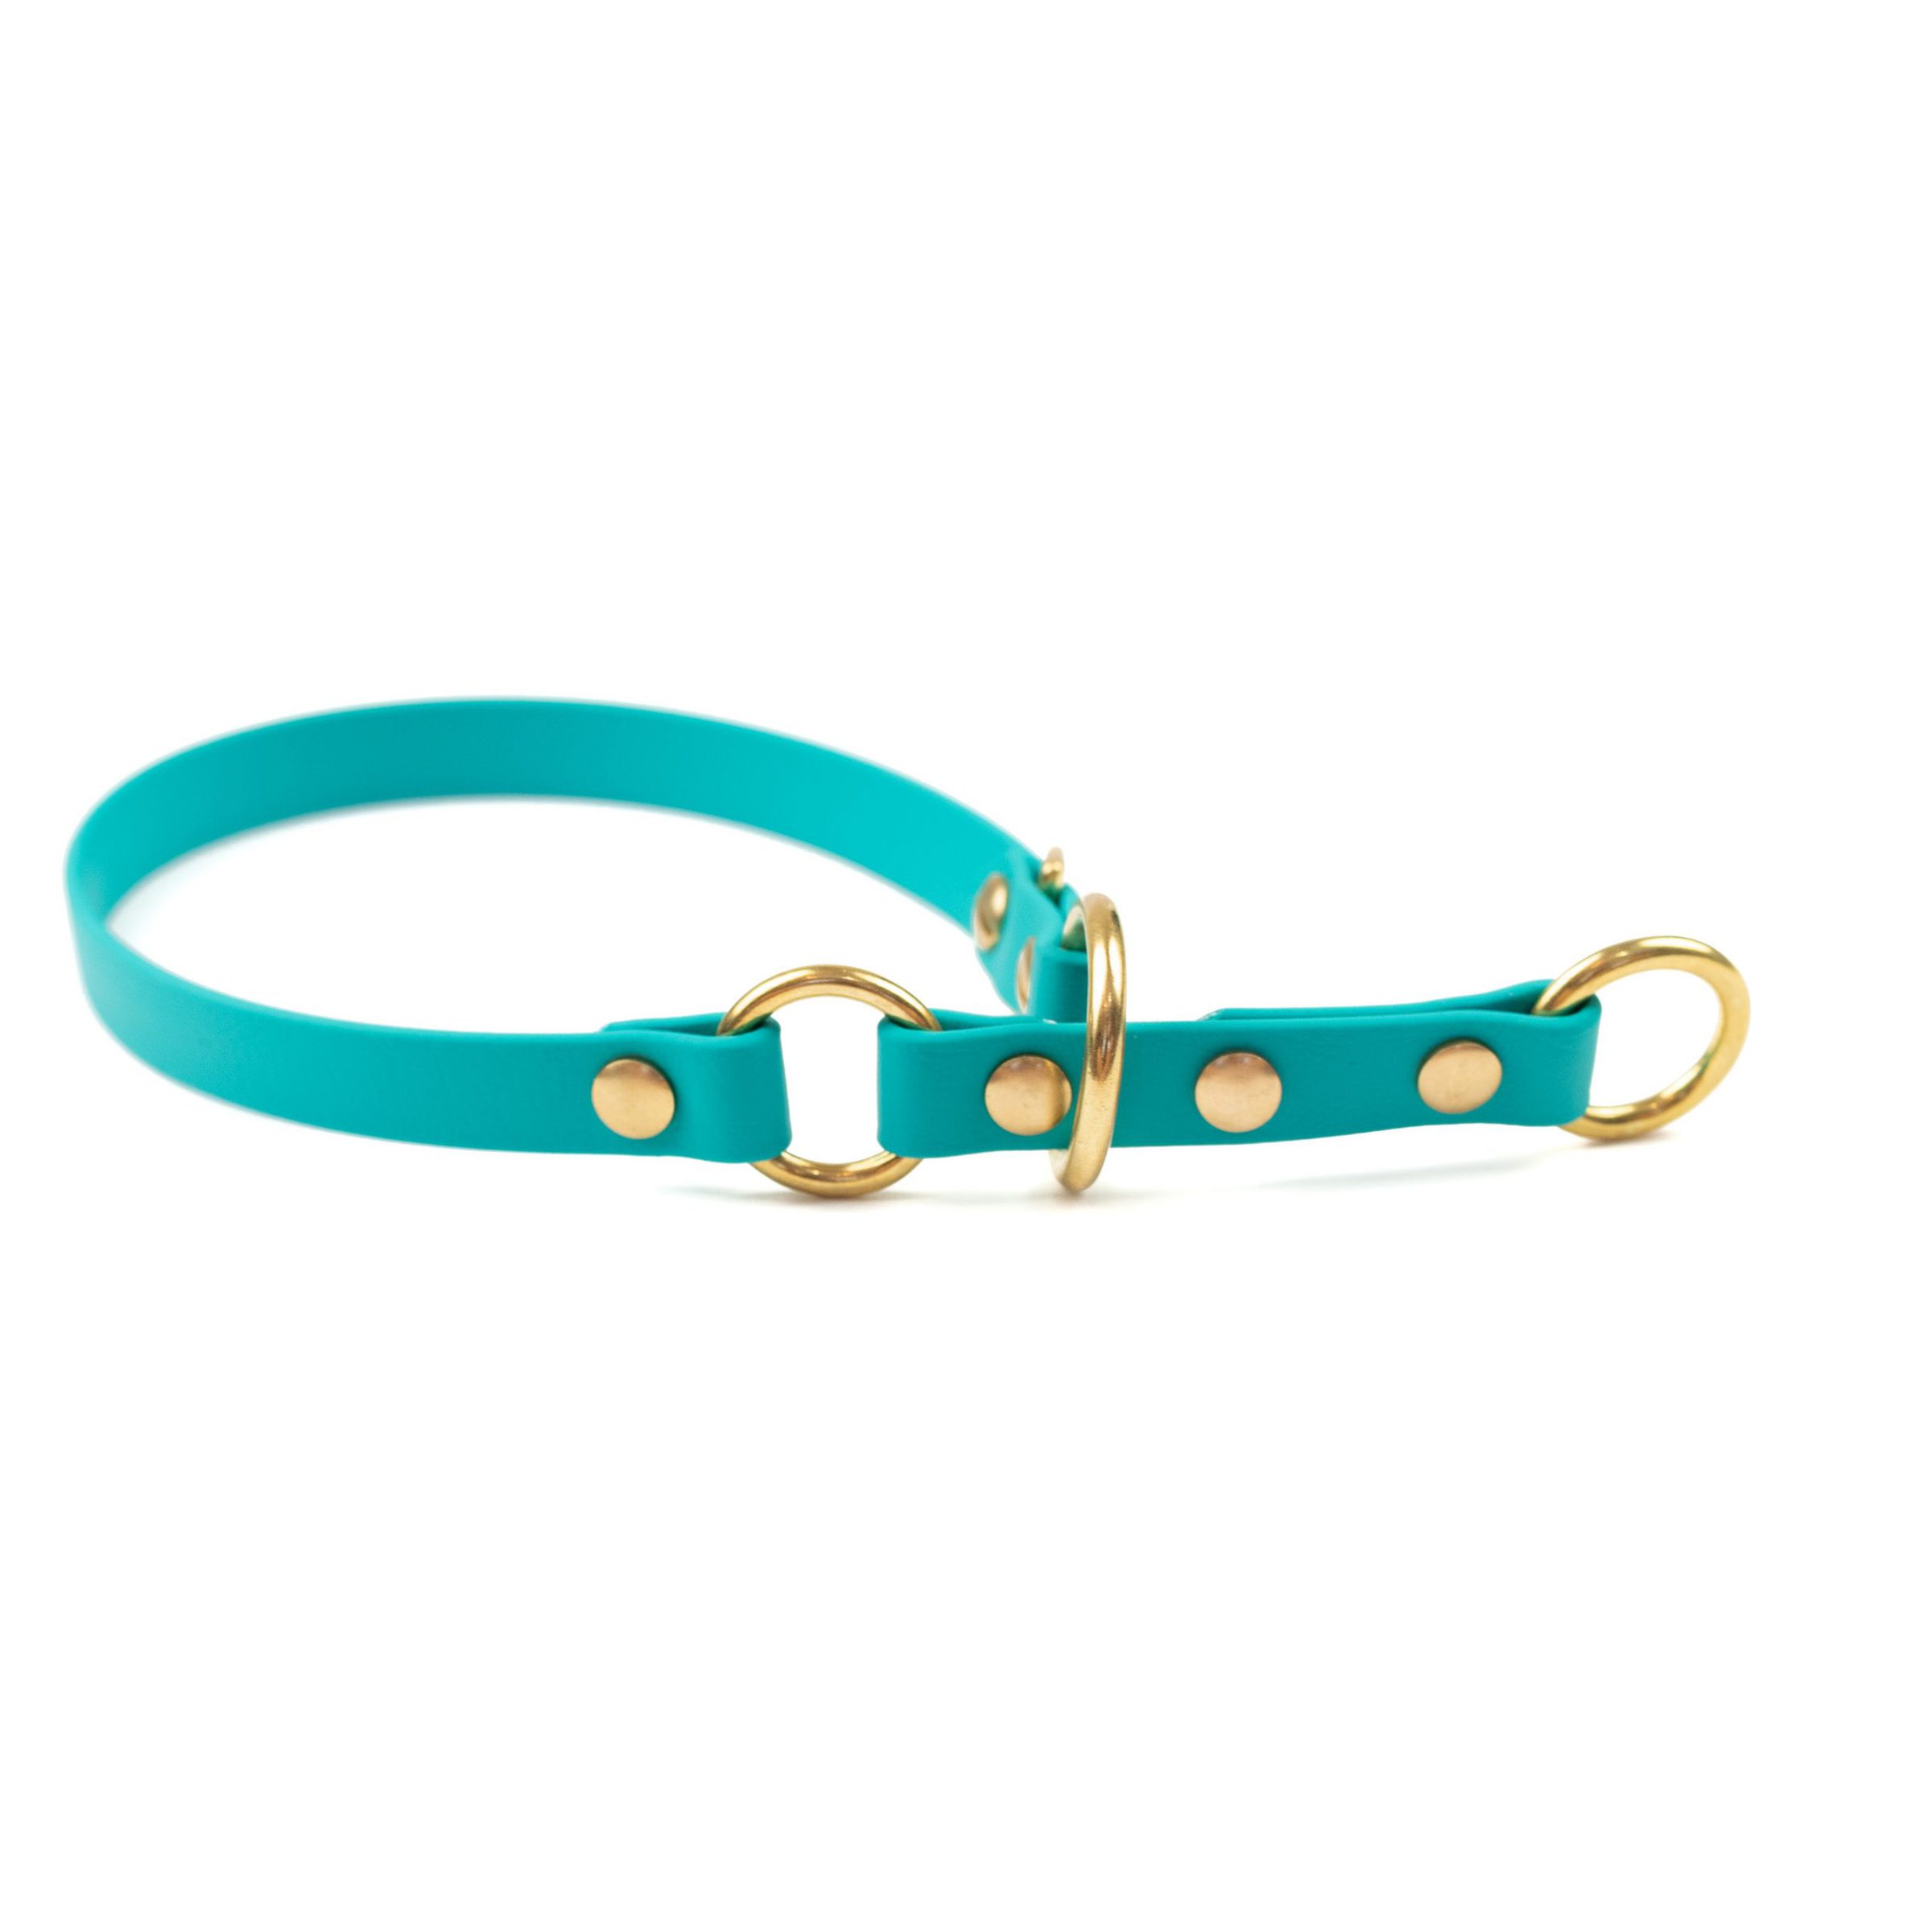 Teal and brass 5/8" o-ring limited slip collar